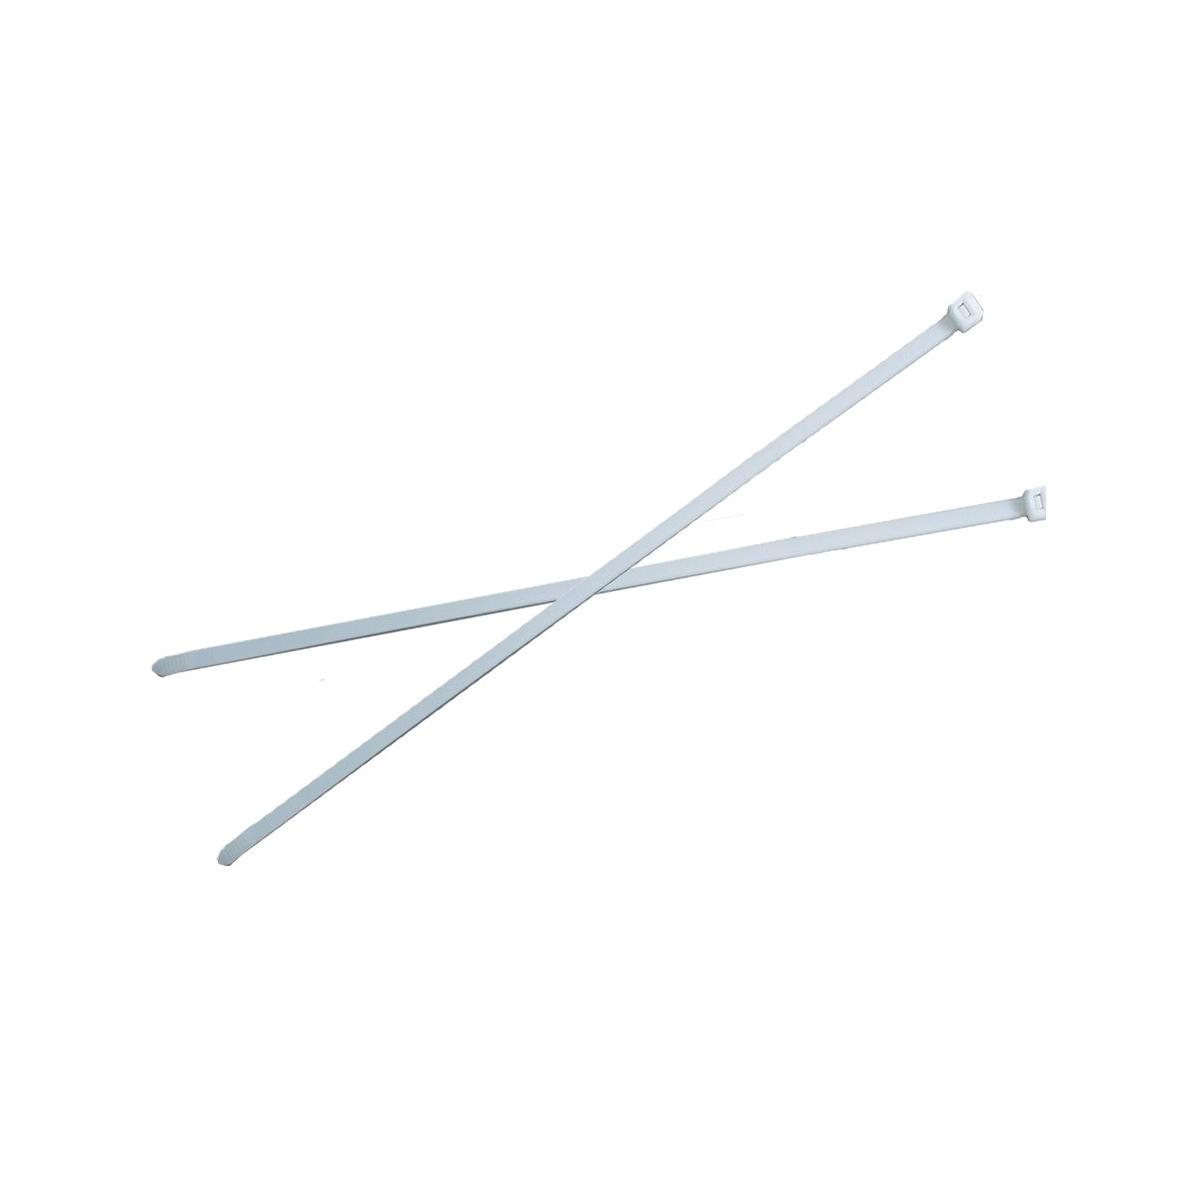 Hubbell CT175600Q Natural Nylon 6/6 Cable Tie, 6" Max. Bundle Dia, 175 Lbs, 21" Long, 0.35" Wide.  ; Standard Cable Tie ; Features: Cable Ties for General Use Available in Black or Natural, One piece injection molded, Installation Tool: TWT2, MK9 Tool